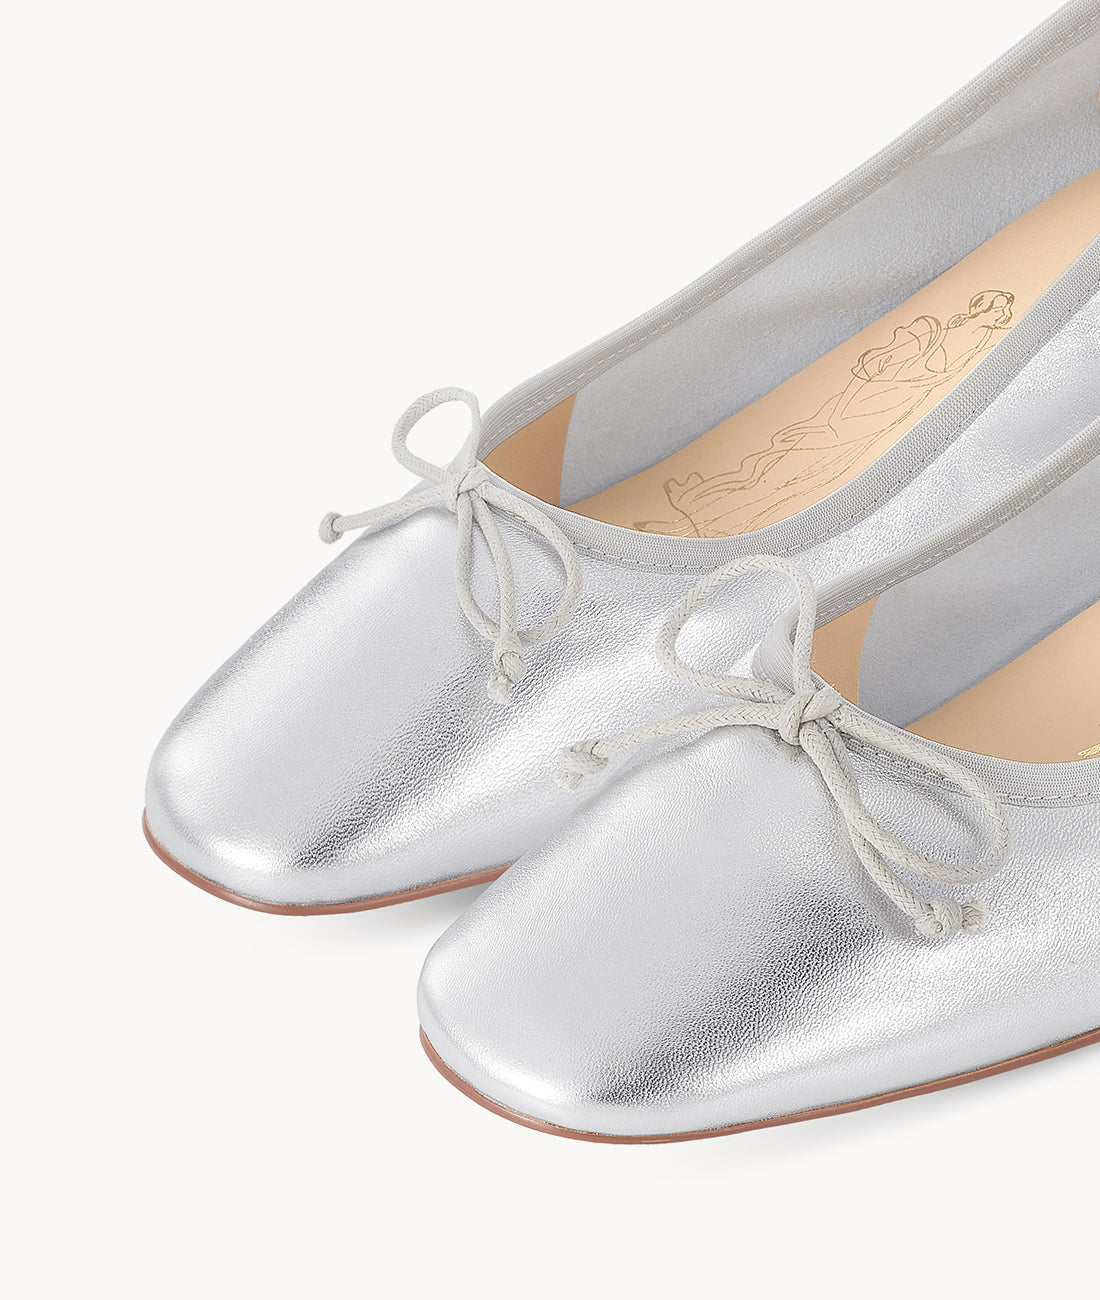 Silver Roll Taro Roll Air-touch Foam Round-toe silver Ballet Shoes with bow